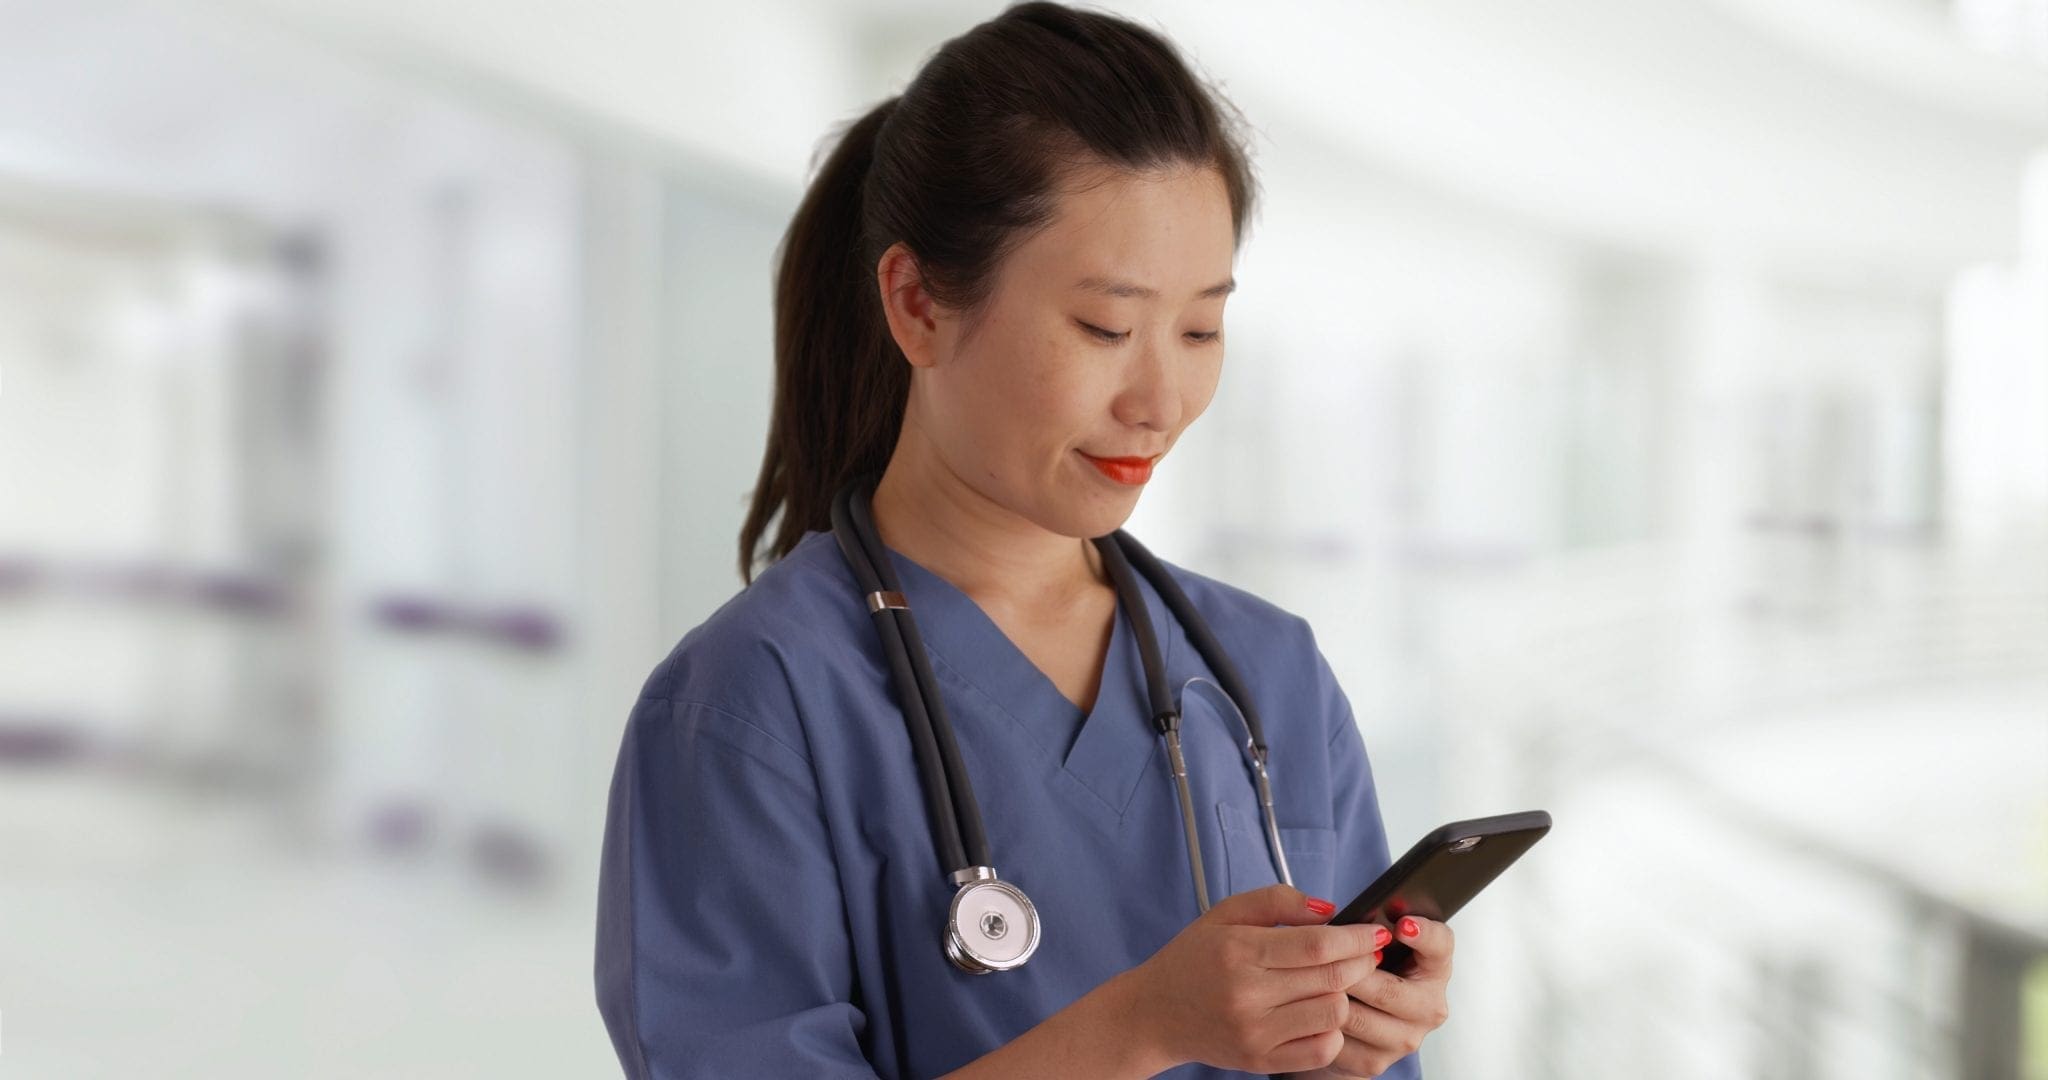 Apps for Medical Professionals